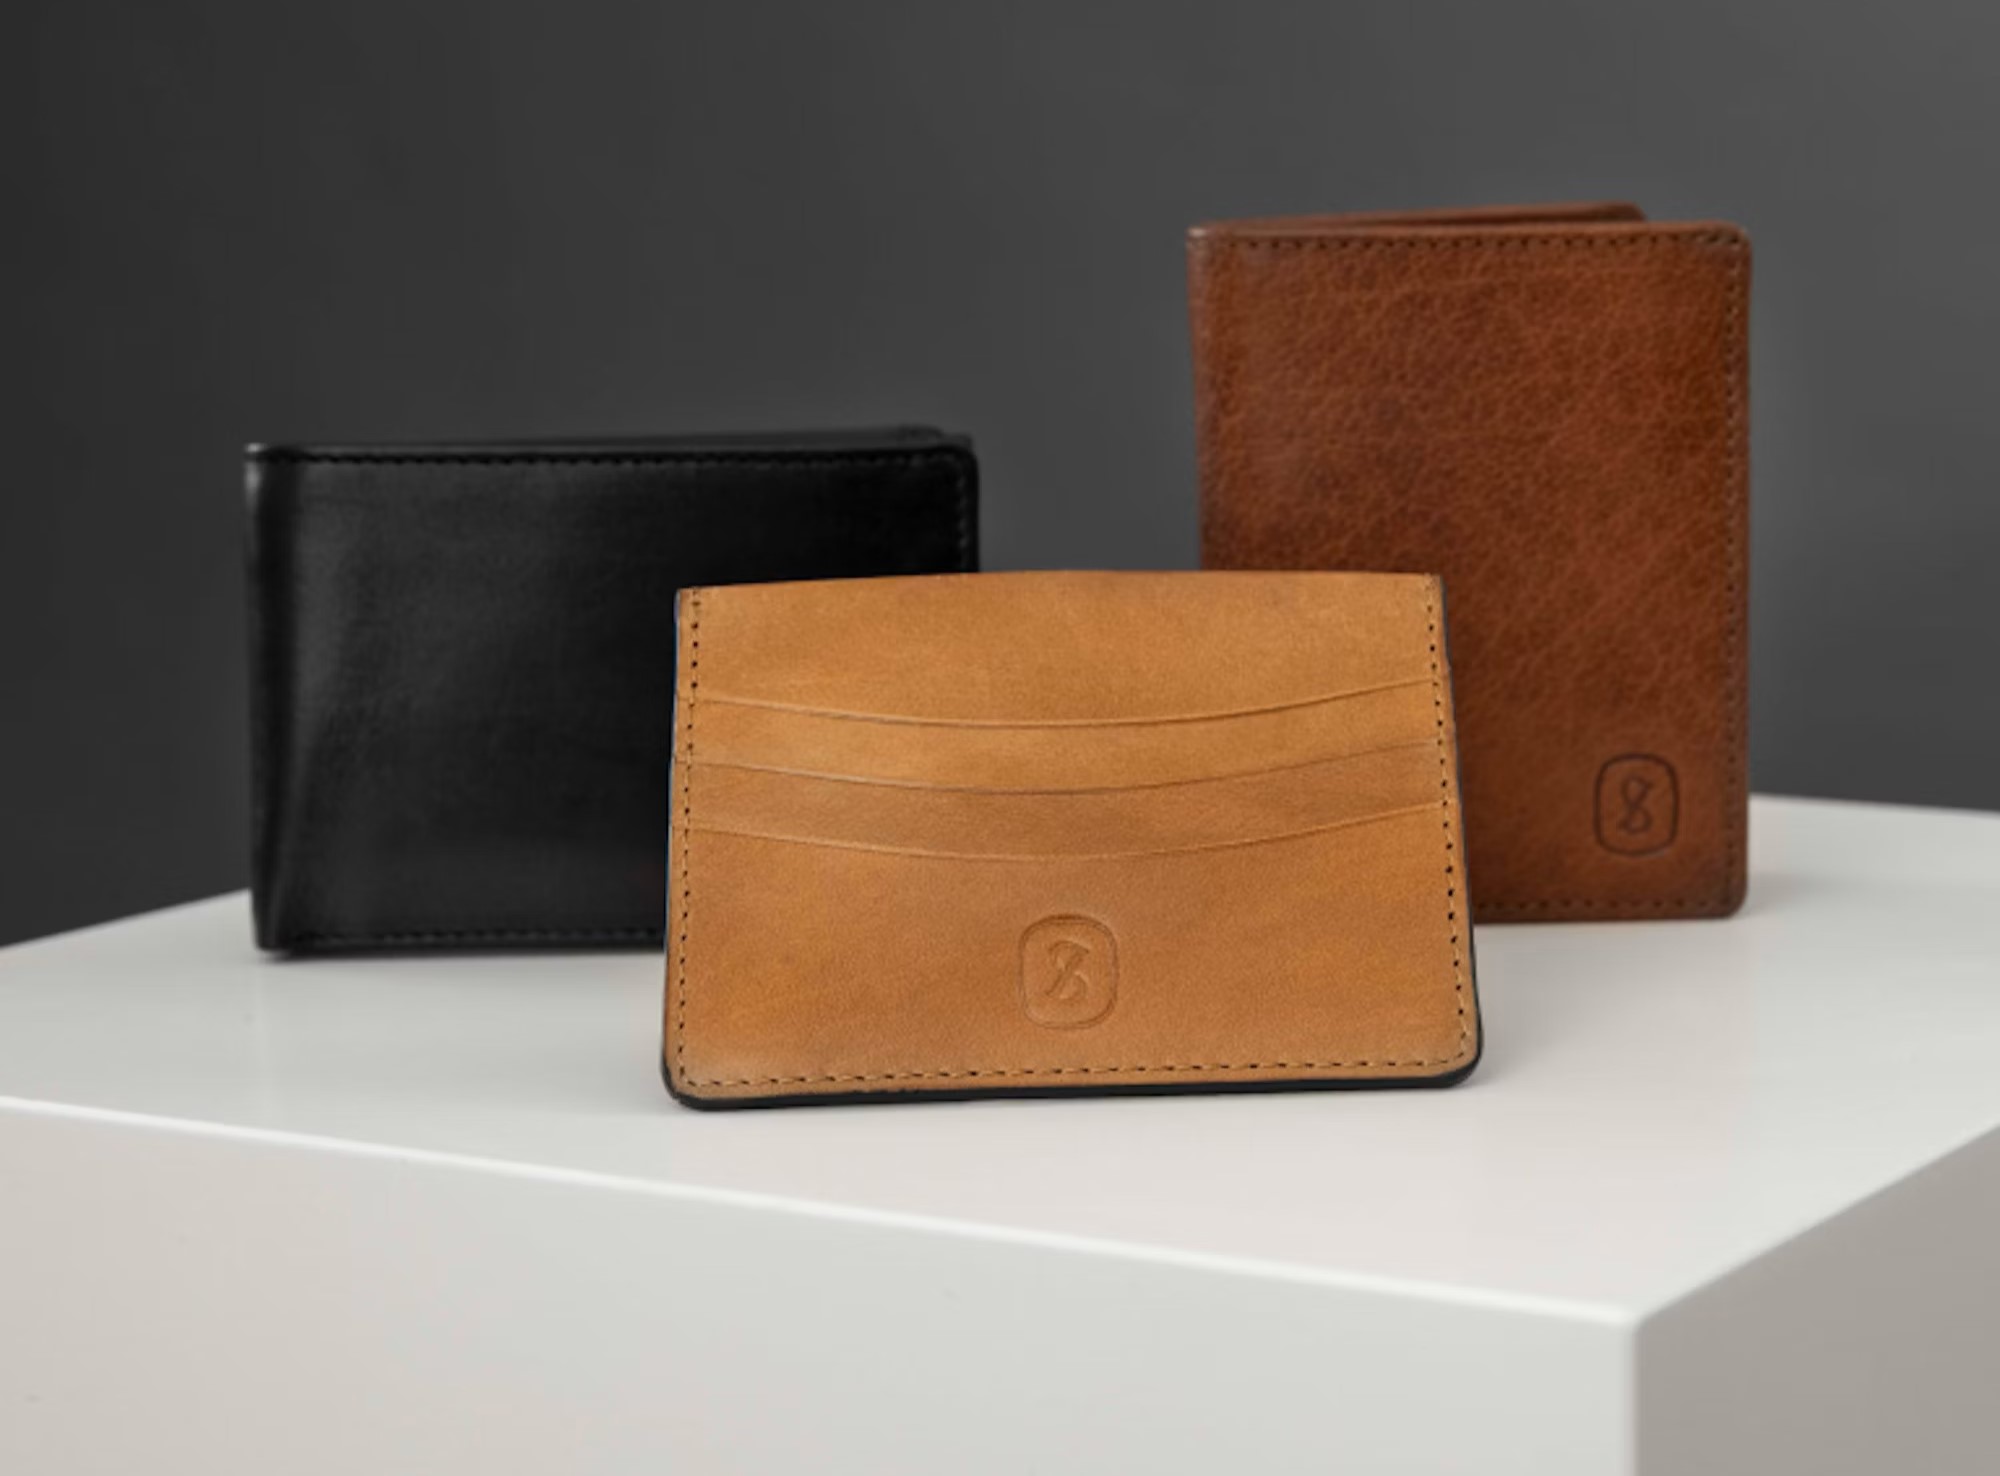 Review: Stylish Leather Wallet - A Must-Have Accessory